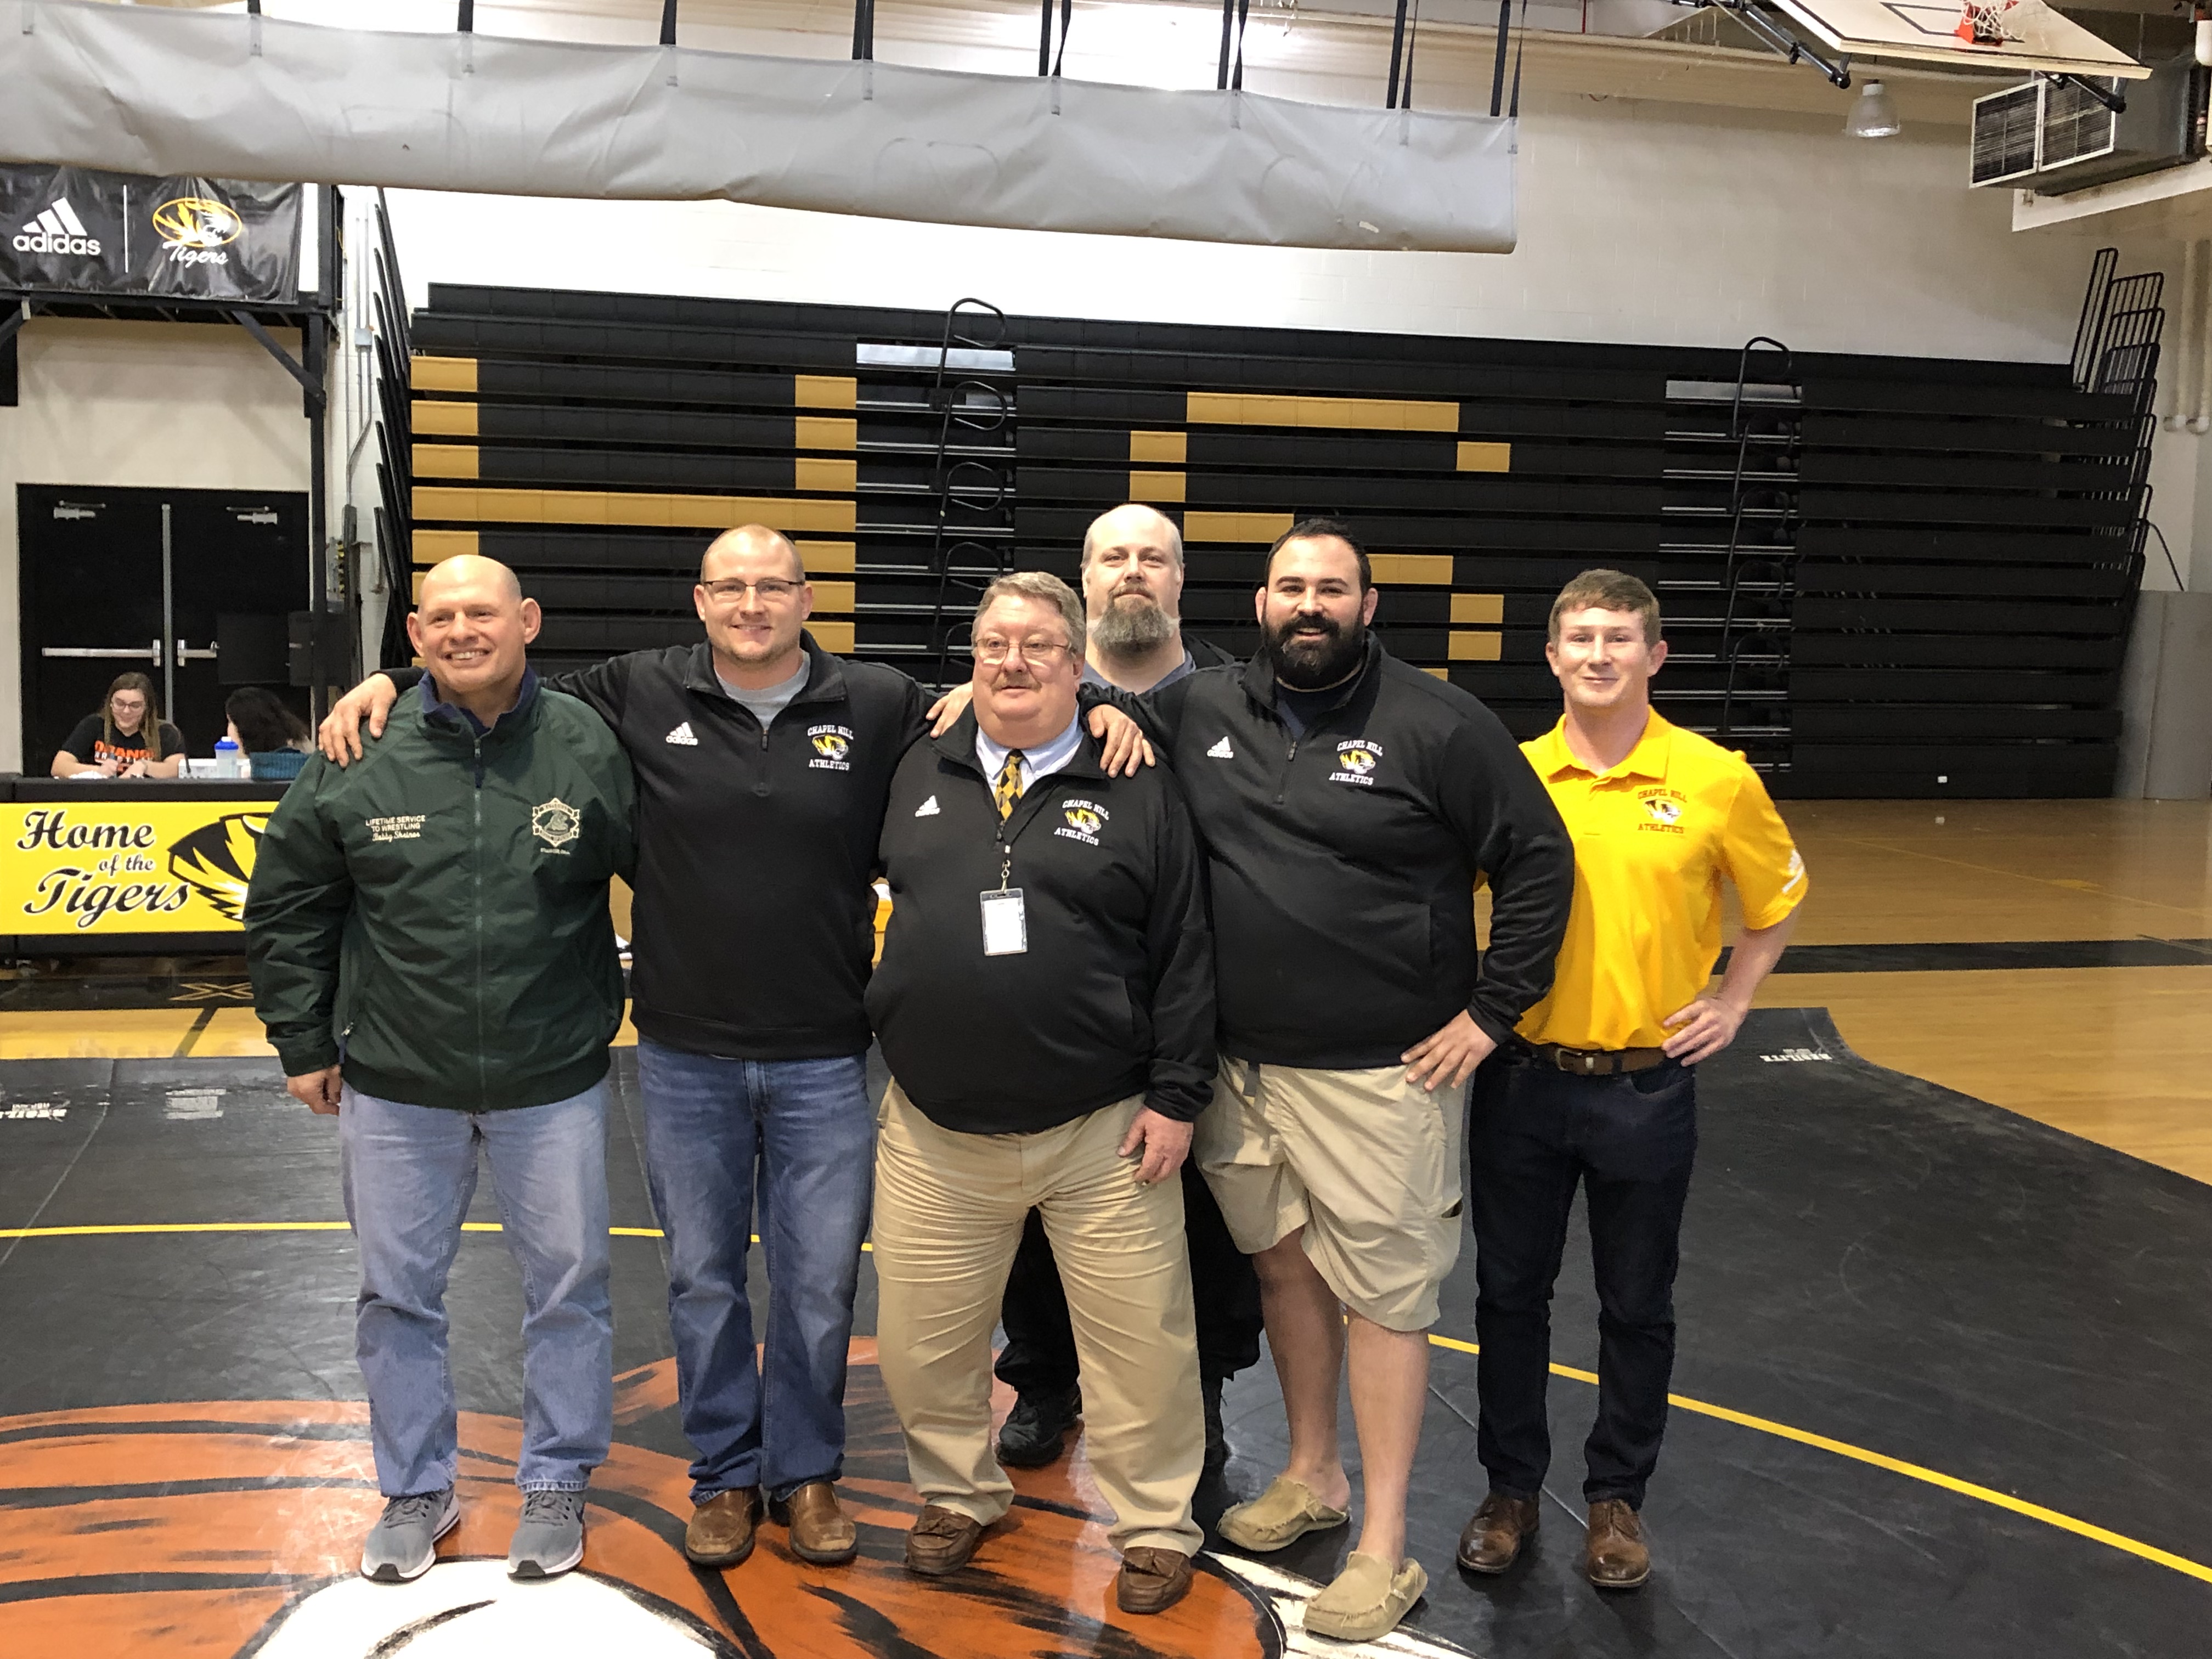 Chapel Hill wrestling coach inducted into wrestling Hall of Fame | Proconian